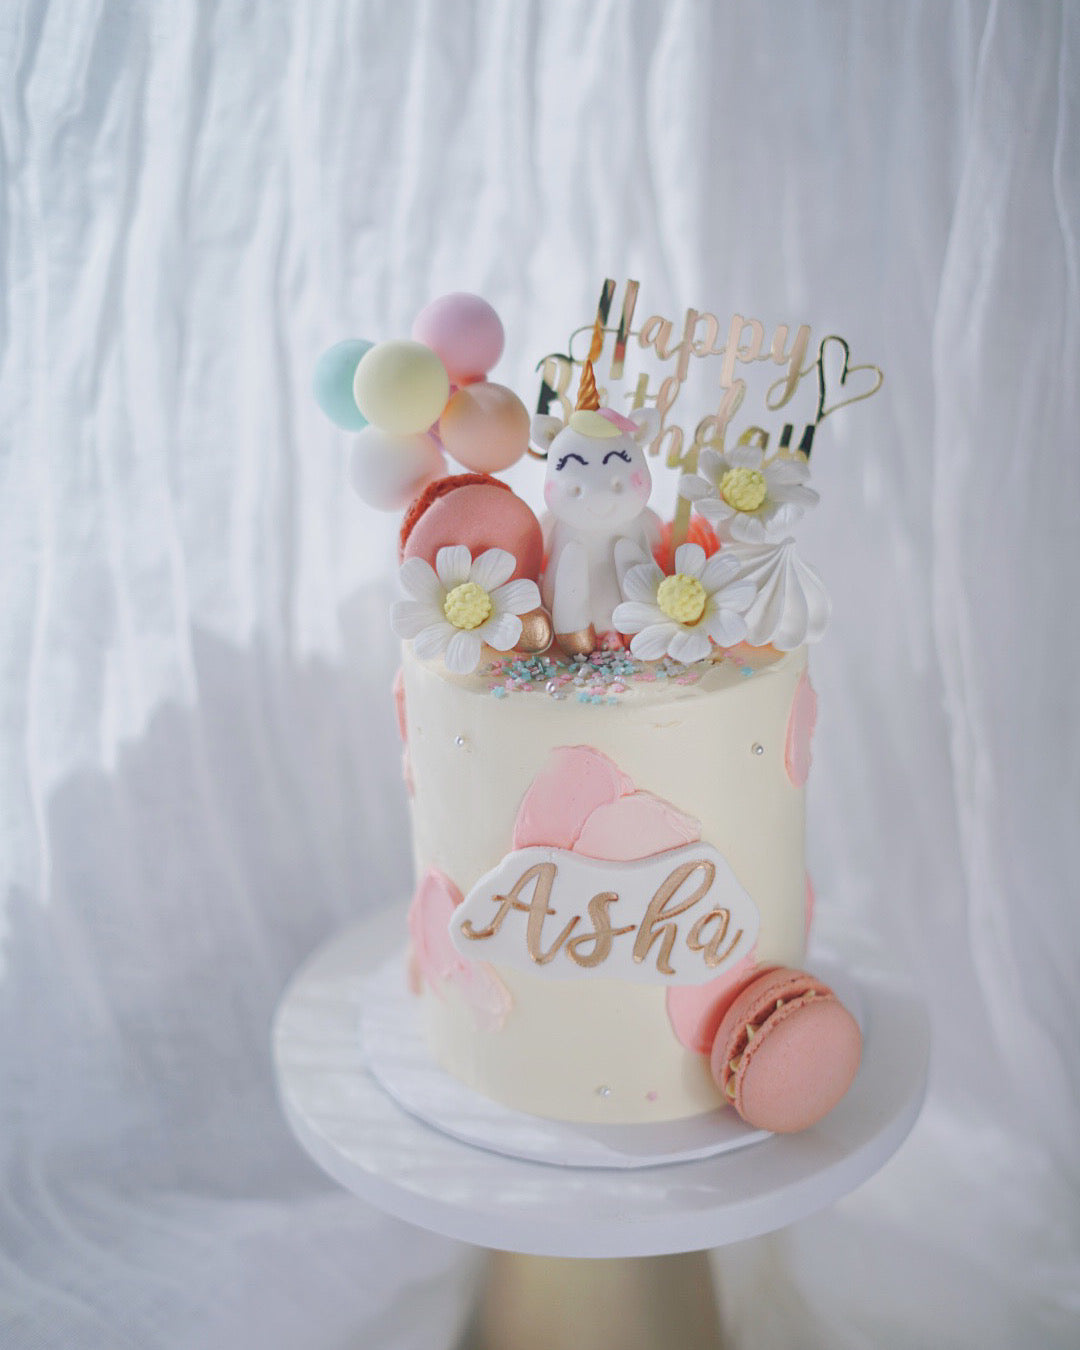 Baby Animal Cake- Daisy with Colourful Balloons